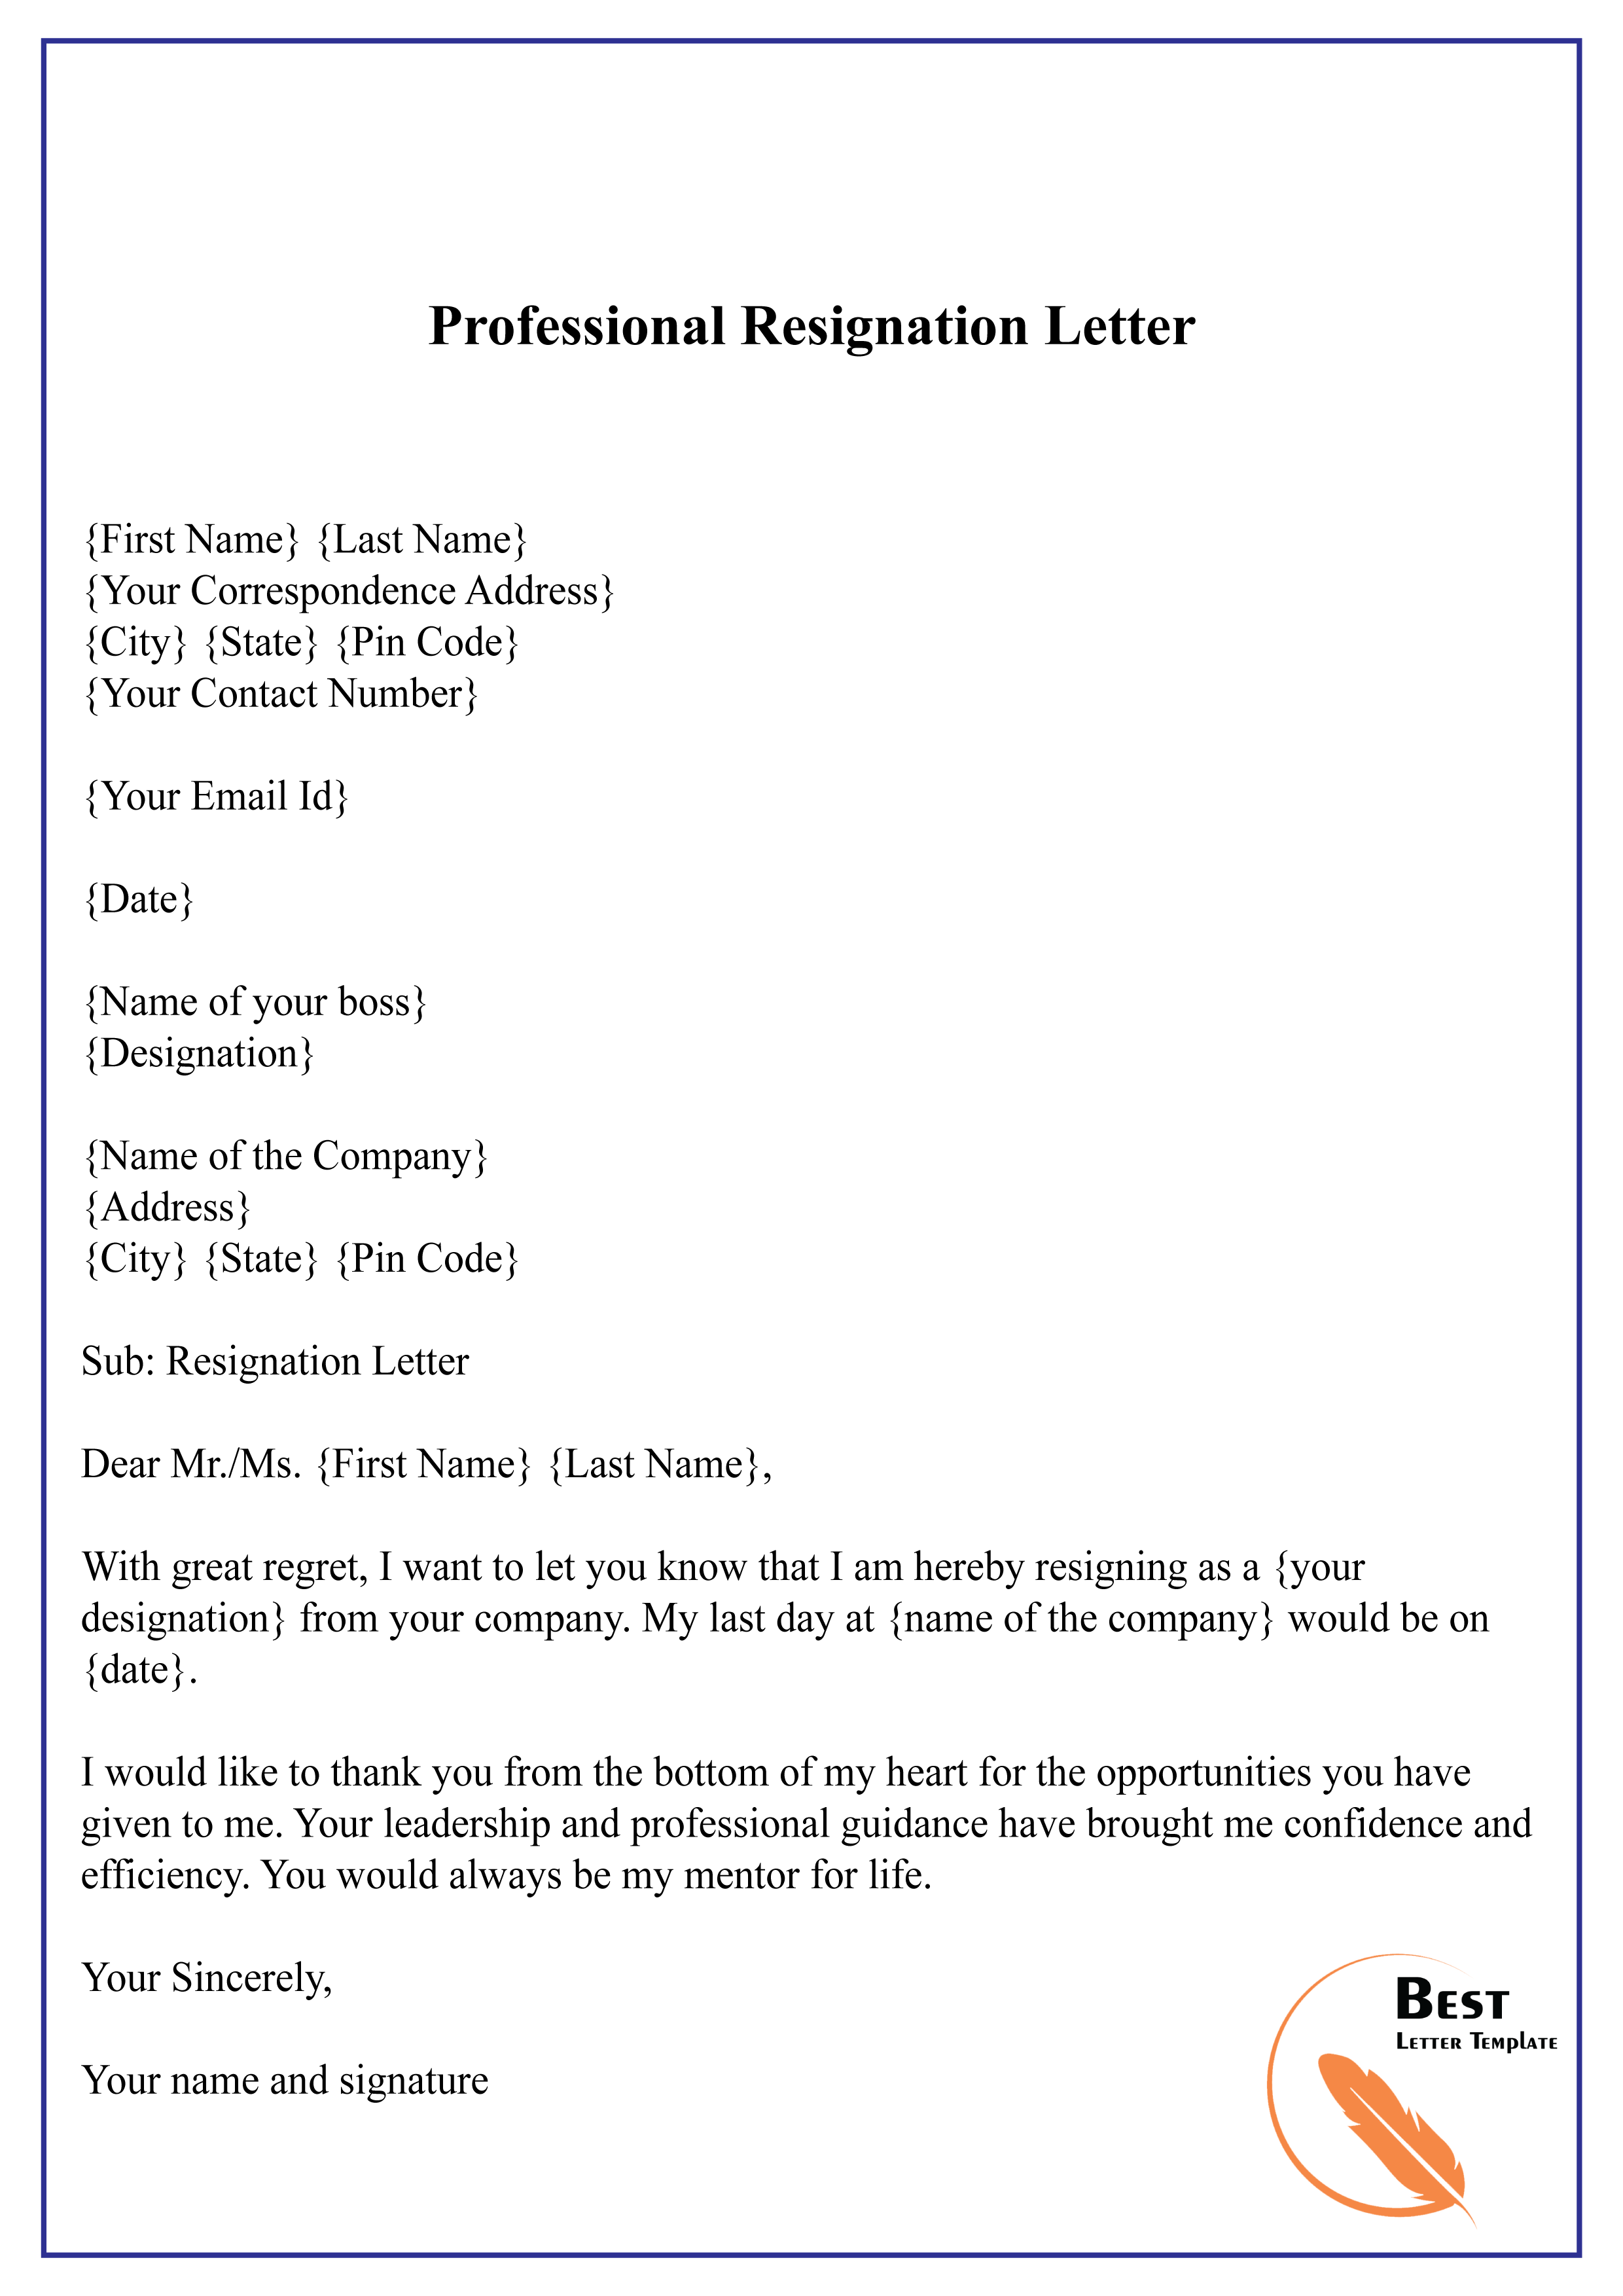 Samples Of Professional Resignation Letter Template Images And Photos The Best Porn Website